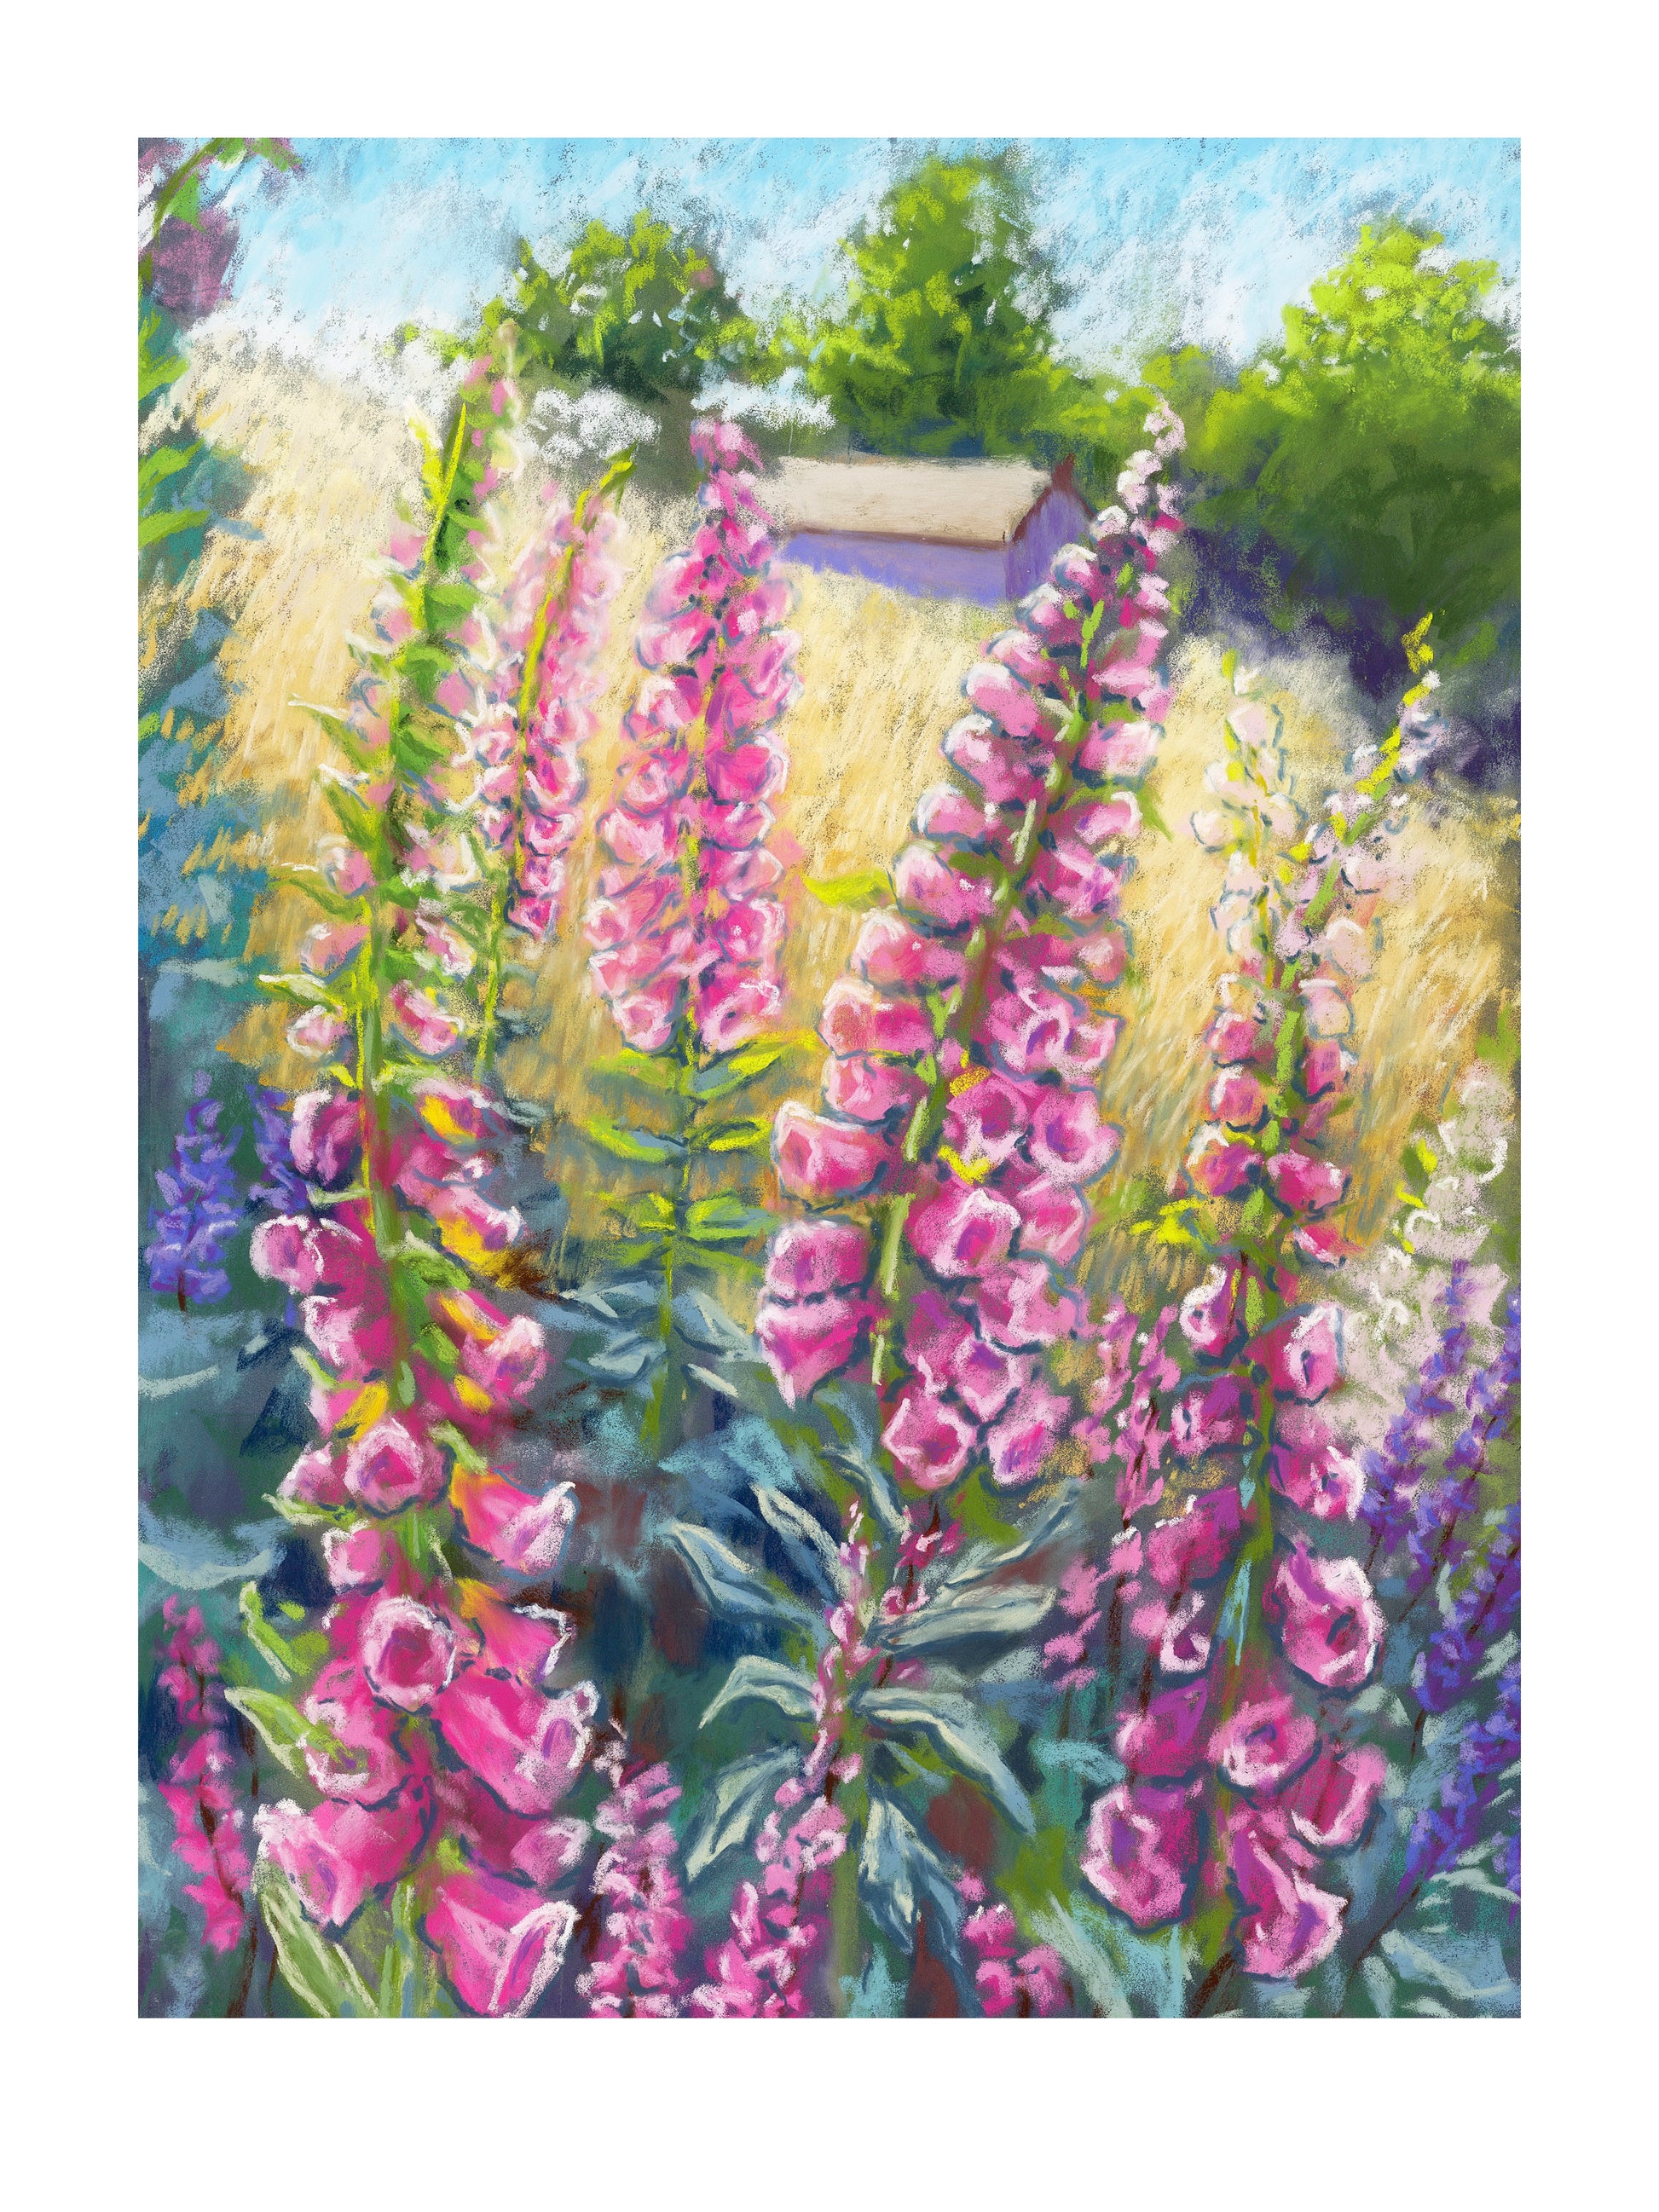 Pink foxgloves in the foreground with a field and building in the background landscape